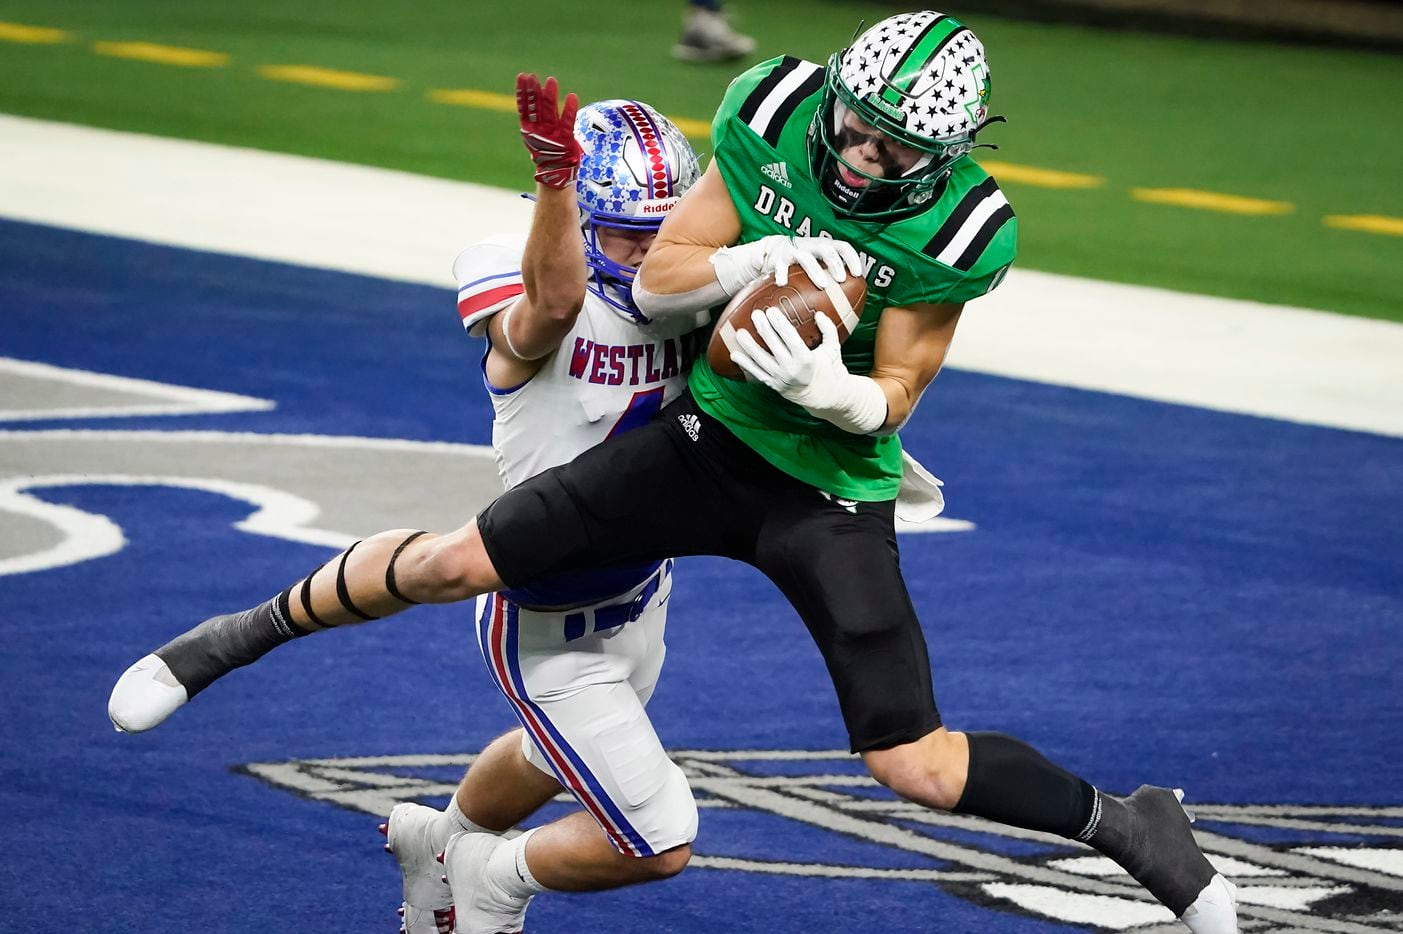 Southlake Carroll wide receiver Brady Boyd (14) catches a 27-yard touchdown pass as Austin Westlake defensive back Jax Crockett (4) defends during the second quarter of the Class 6A Division I state football championship game at AT&T Stadium on Saturday, Jan. 16, 2021, in Arlington, Texas. (Smiley N. Pool/The Dallas Morning News)